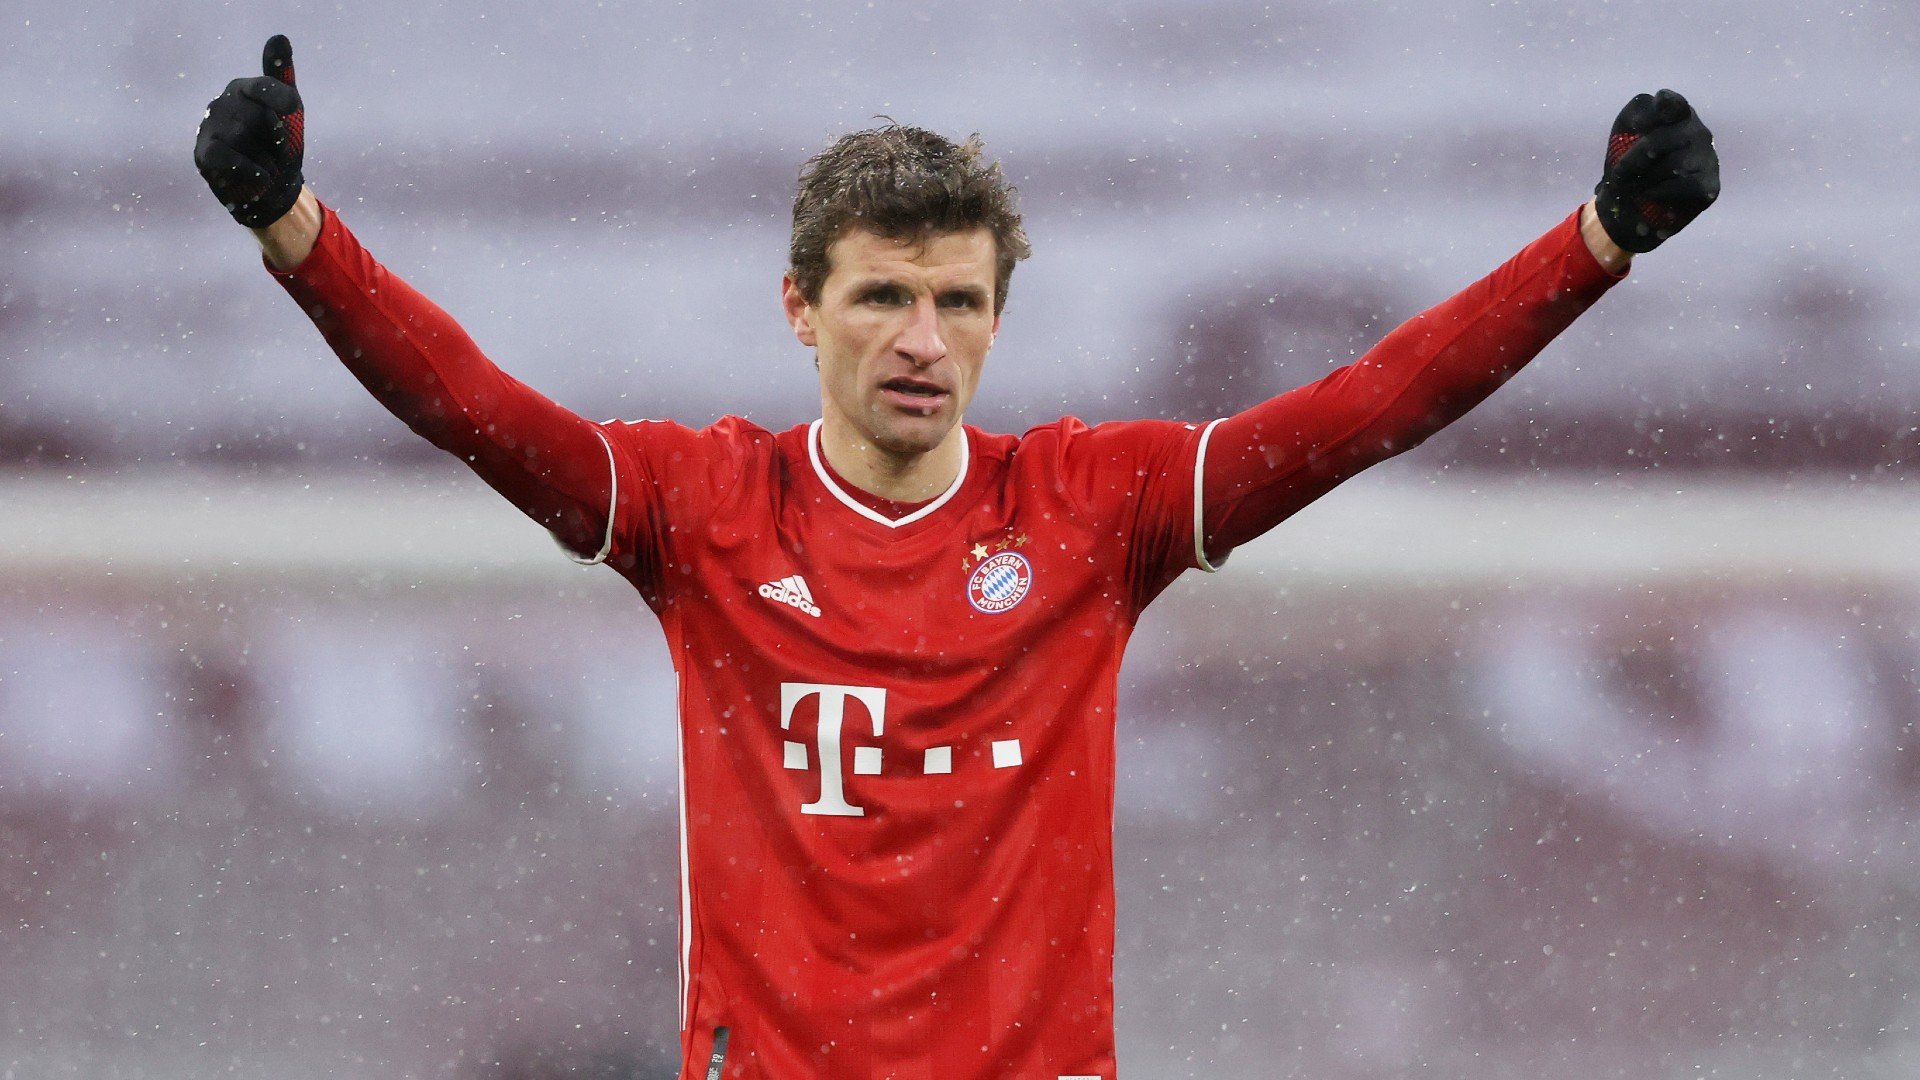 The ease has faded' Munich are being pushed harder this season, admits Muller